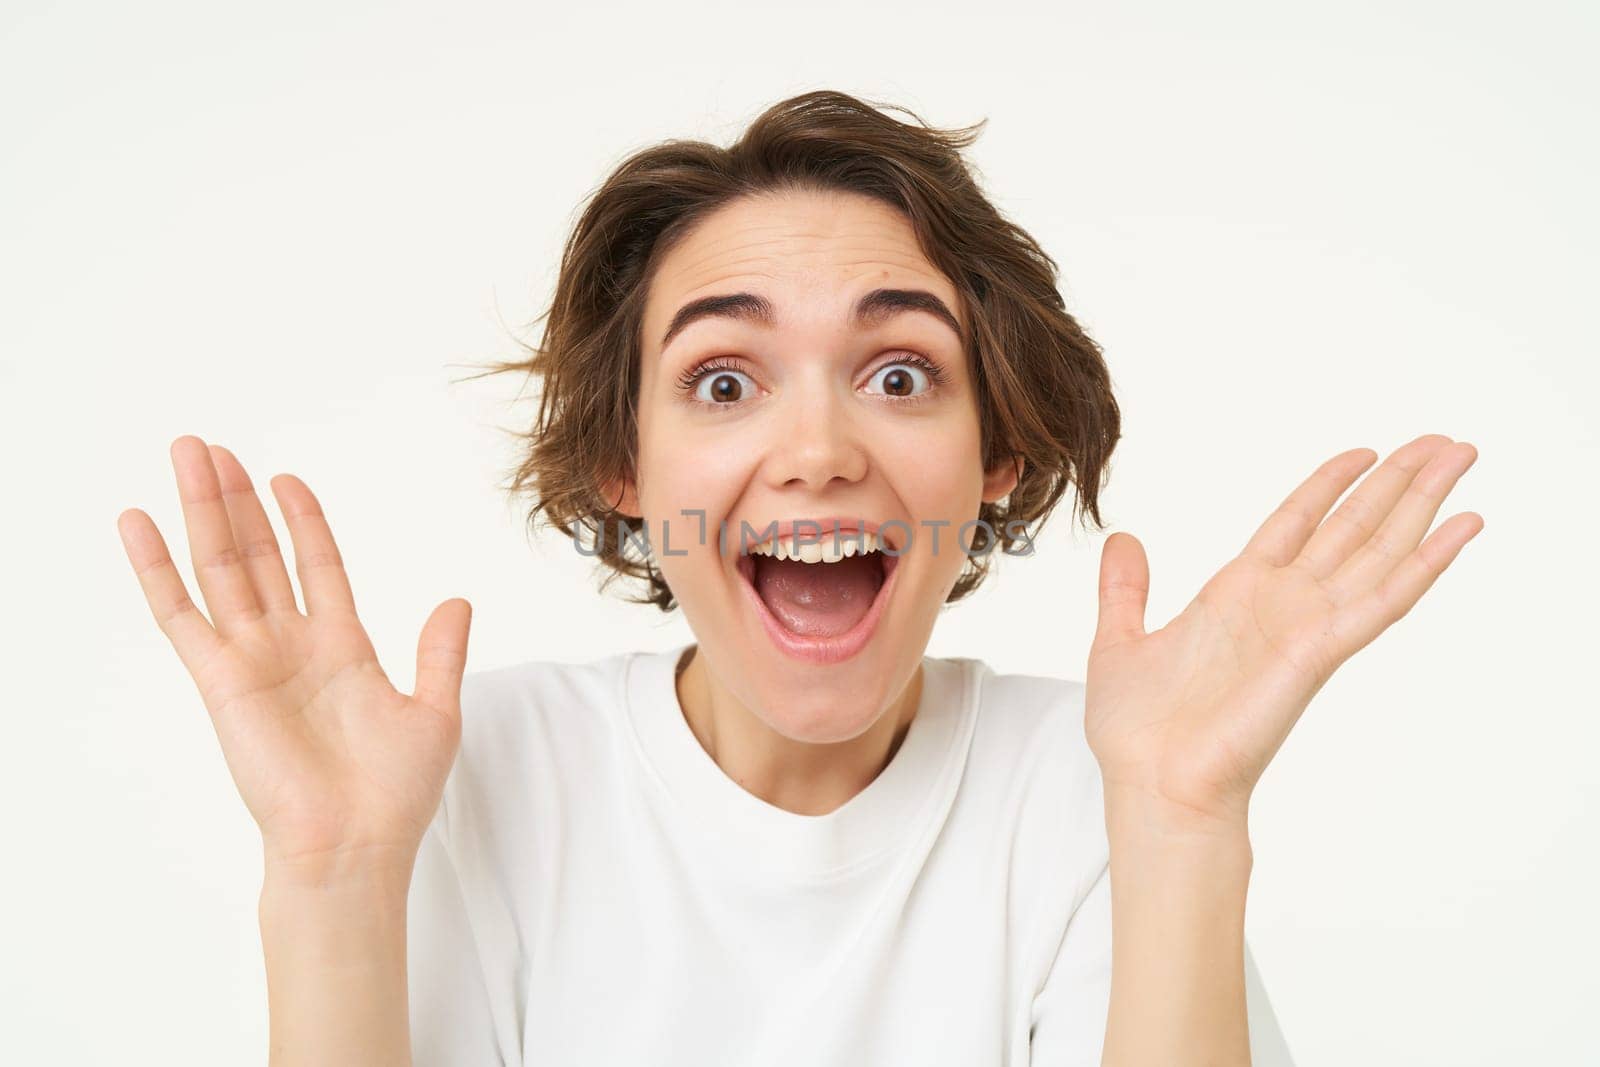 Close up portrait of excited brunette woman, gasping and smiling, claps hands and looks amazed, stands over white background.